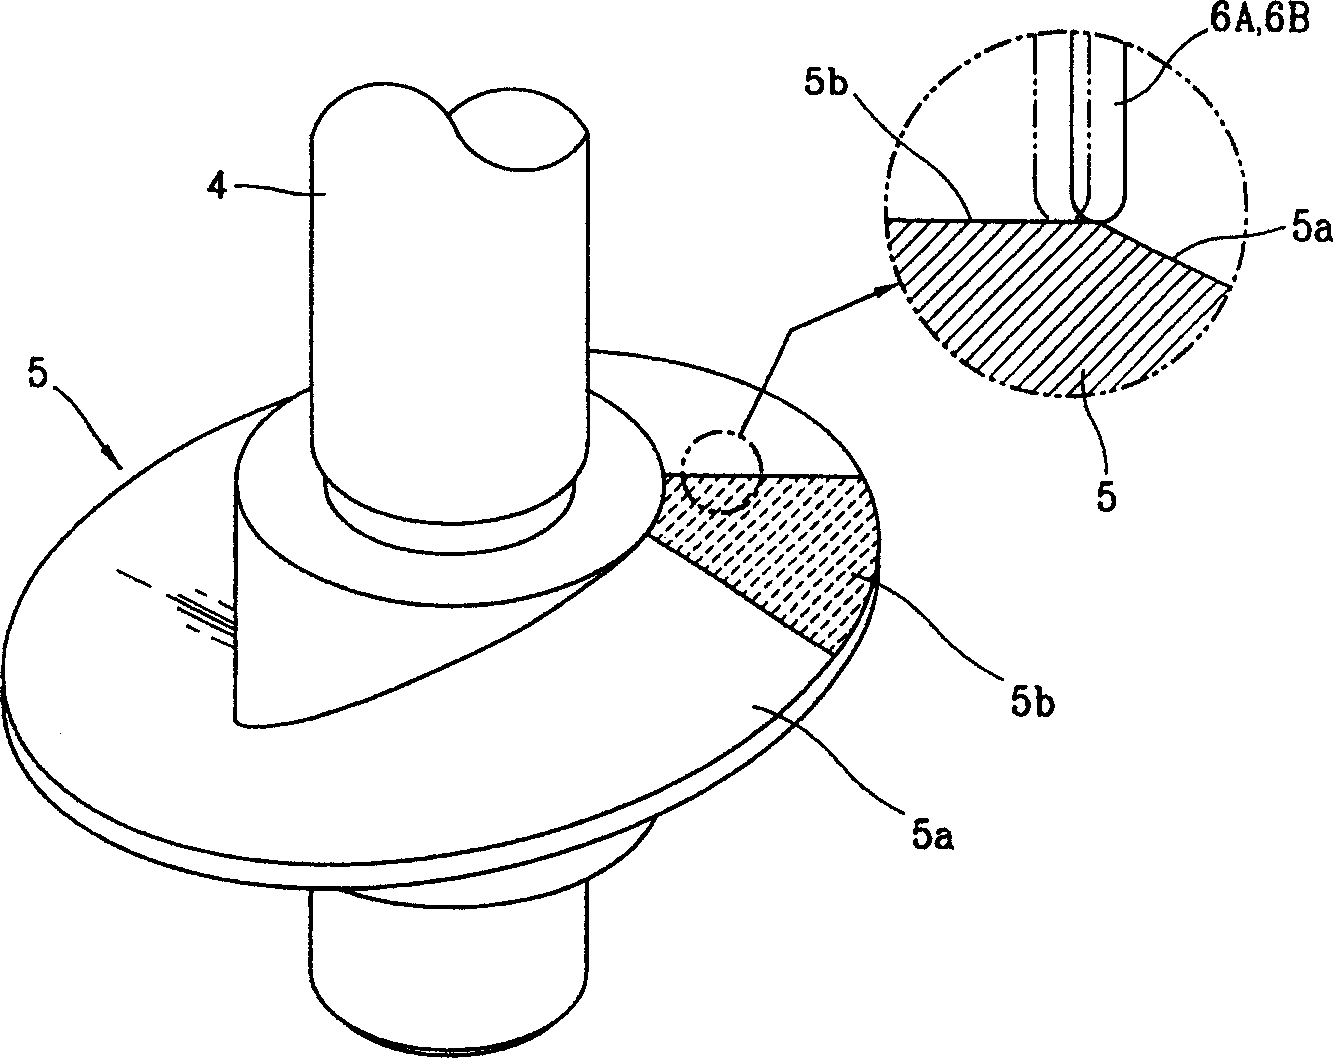 Sealed compressor partition plate structure